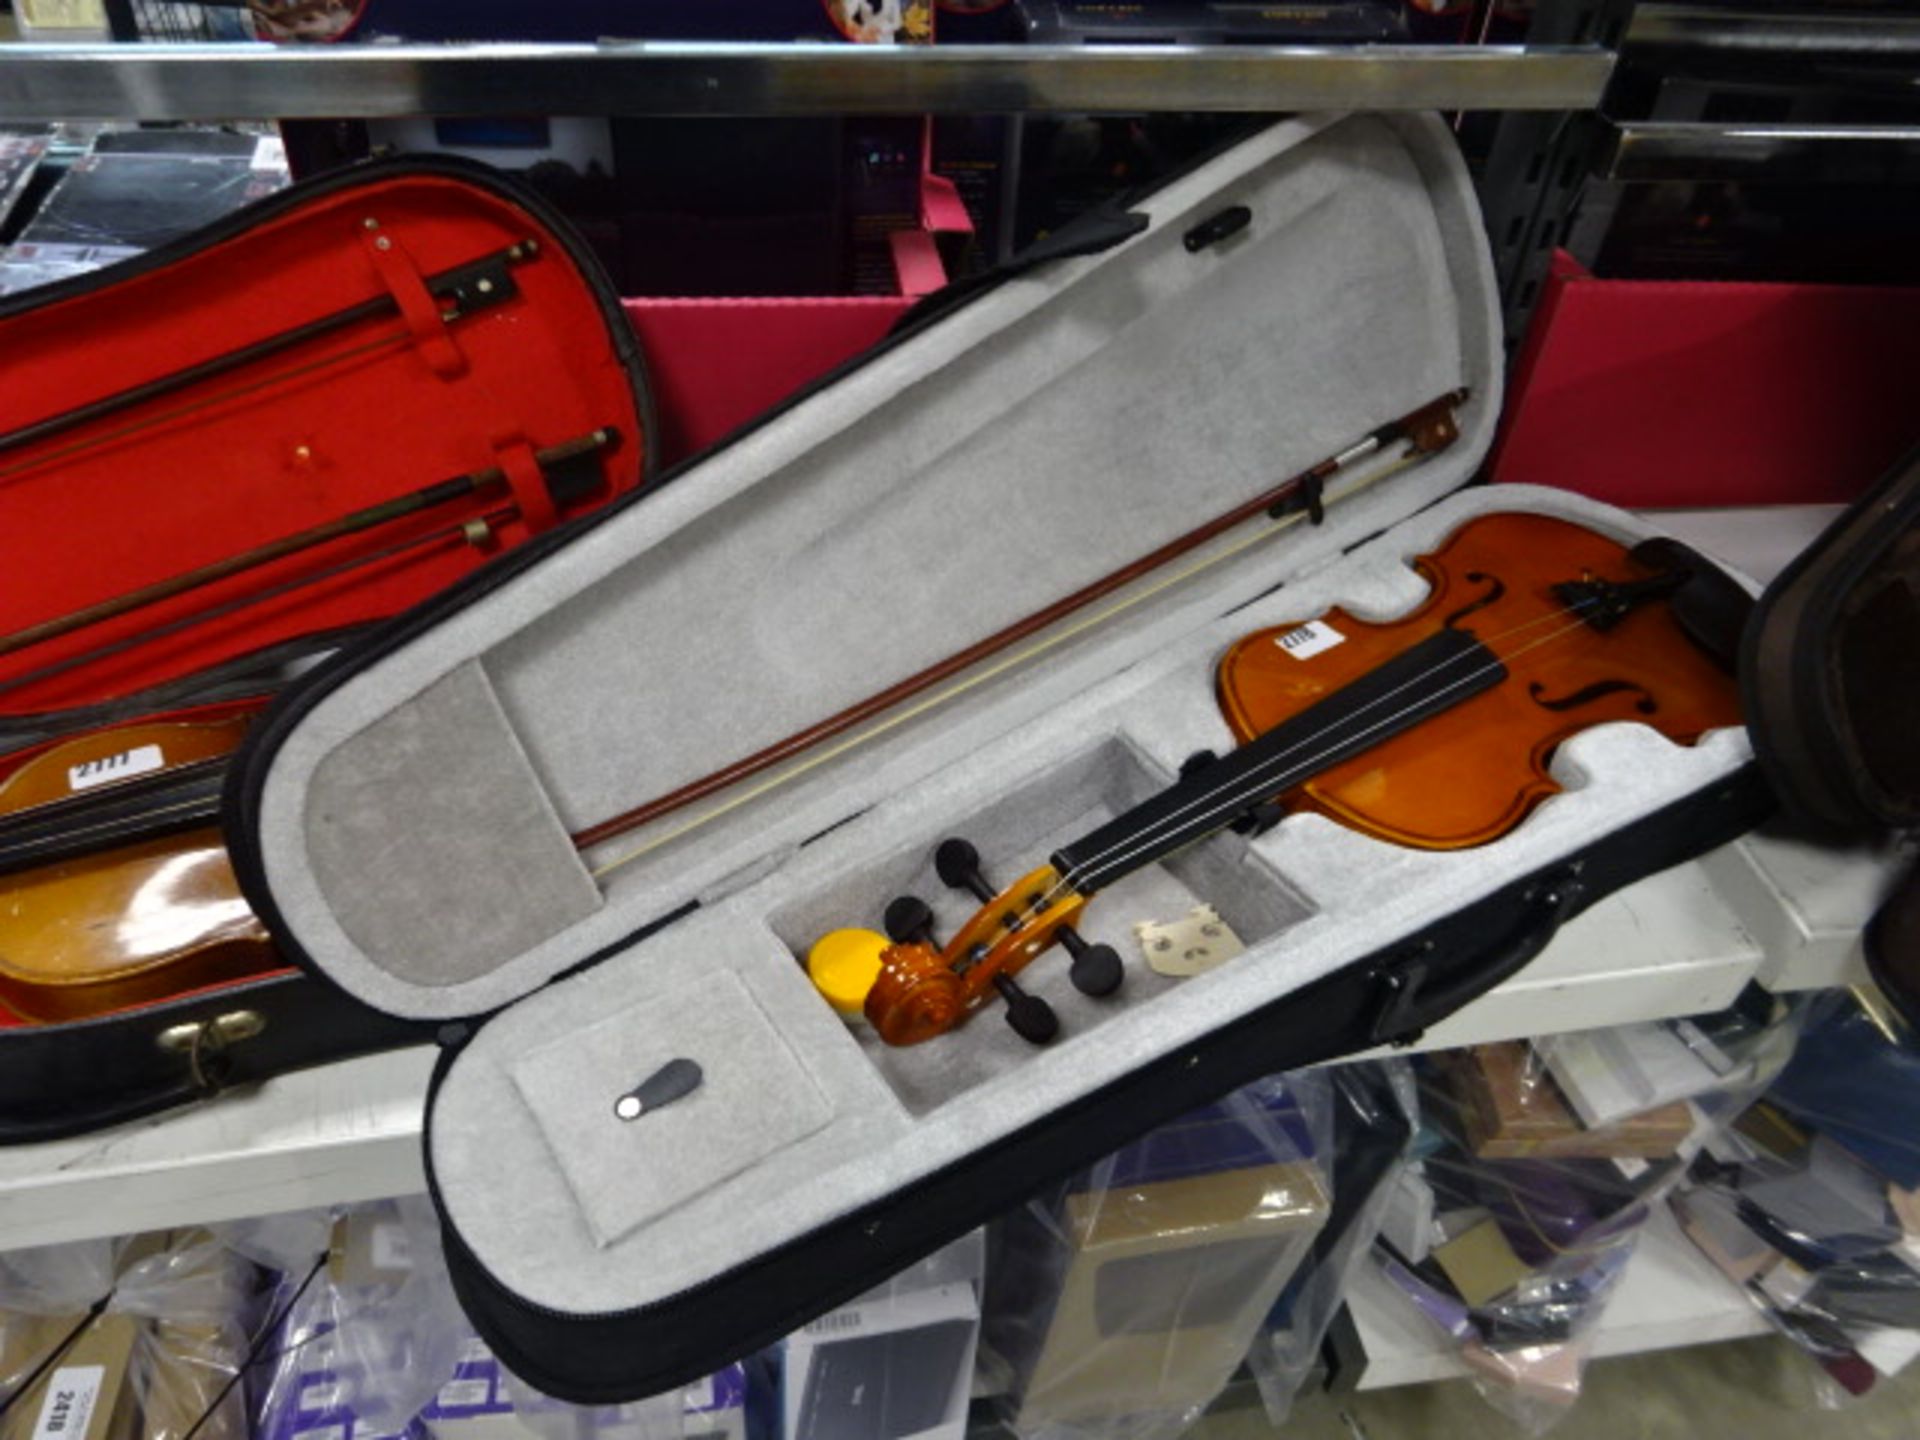 A violin with case and bow (af, missing strings)